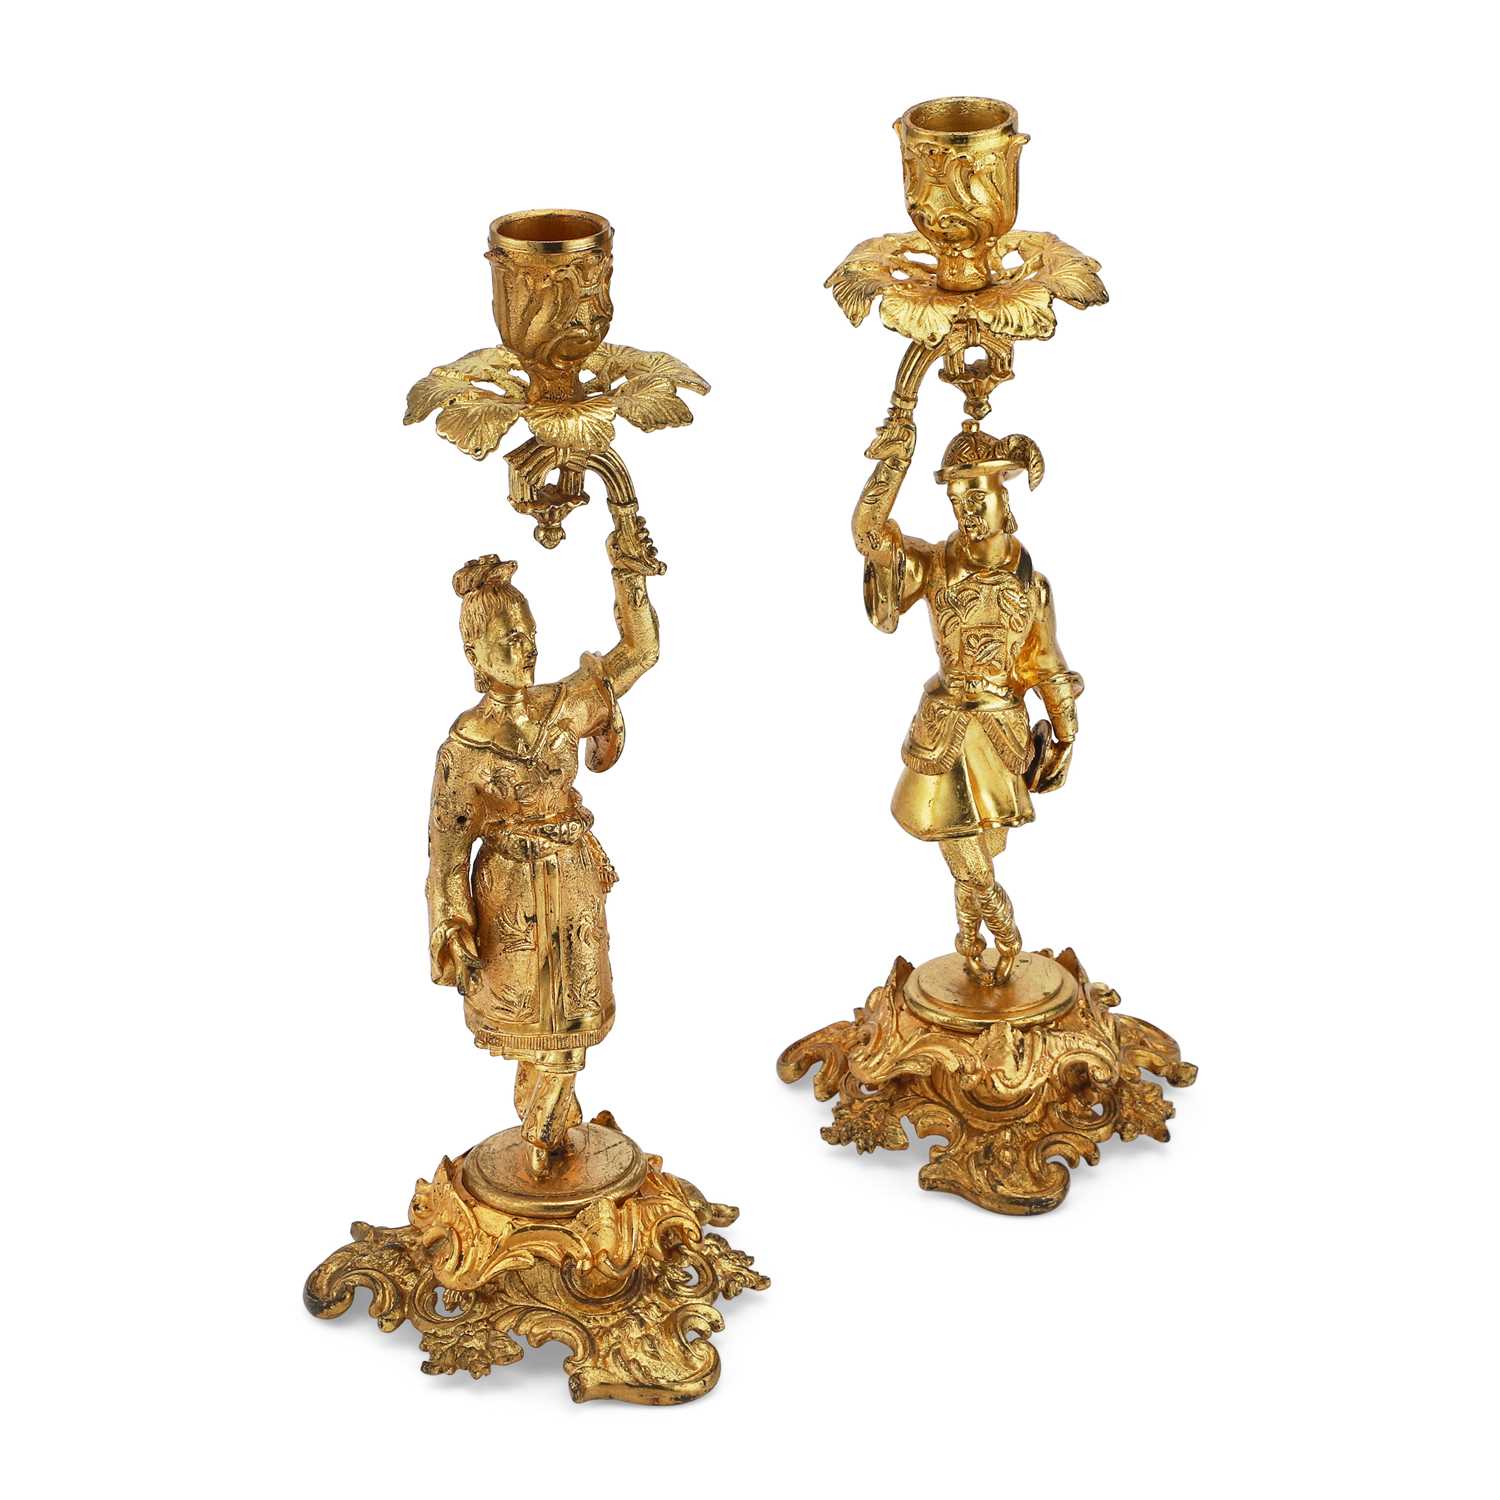 Lot 215 - A PAIR OF 19TH CENTURY GILT-BRASS CHINOISERIE CANDLESTICKS